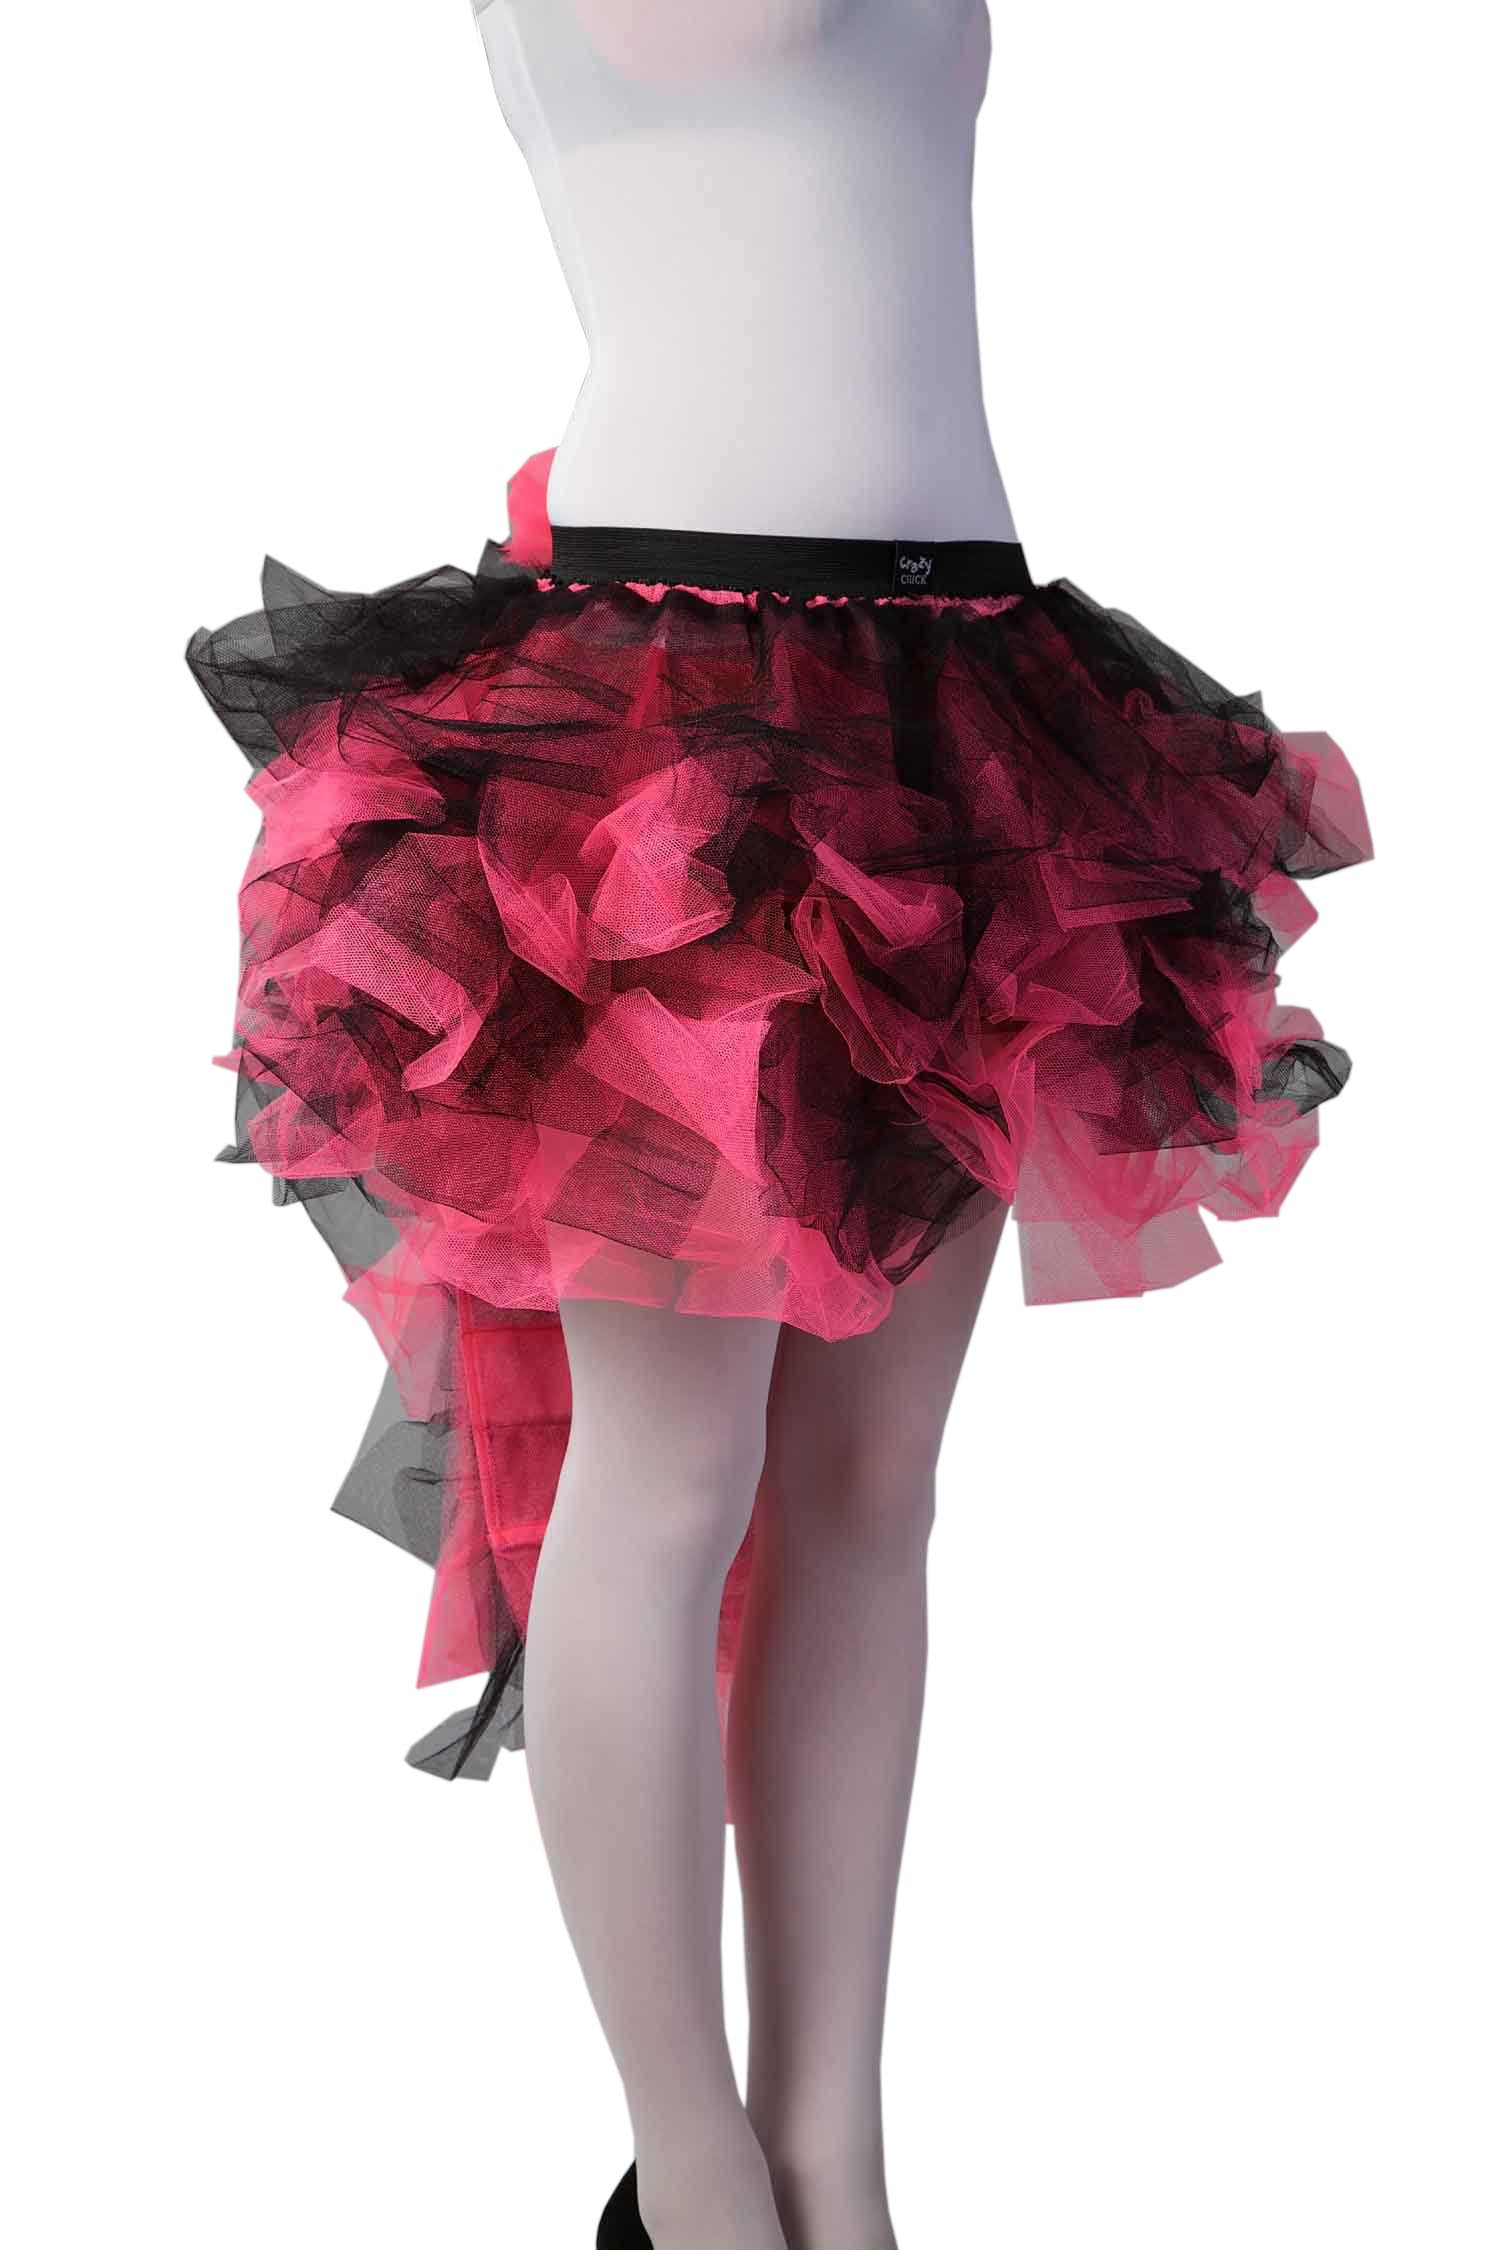 Crazy Chick Adult Long Tail Burlesque Black and Pink Tutu Skirt